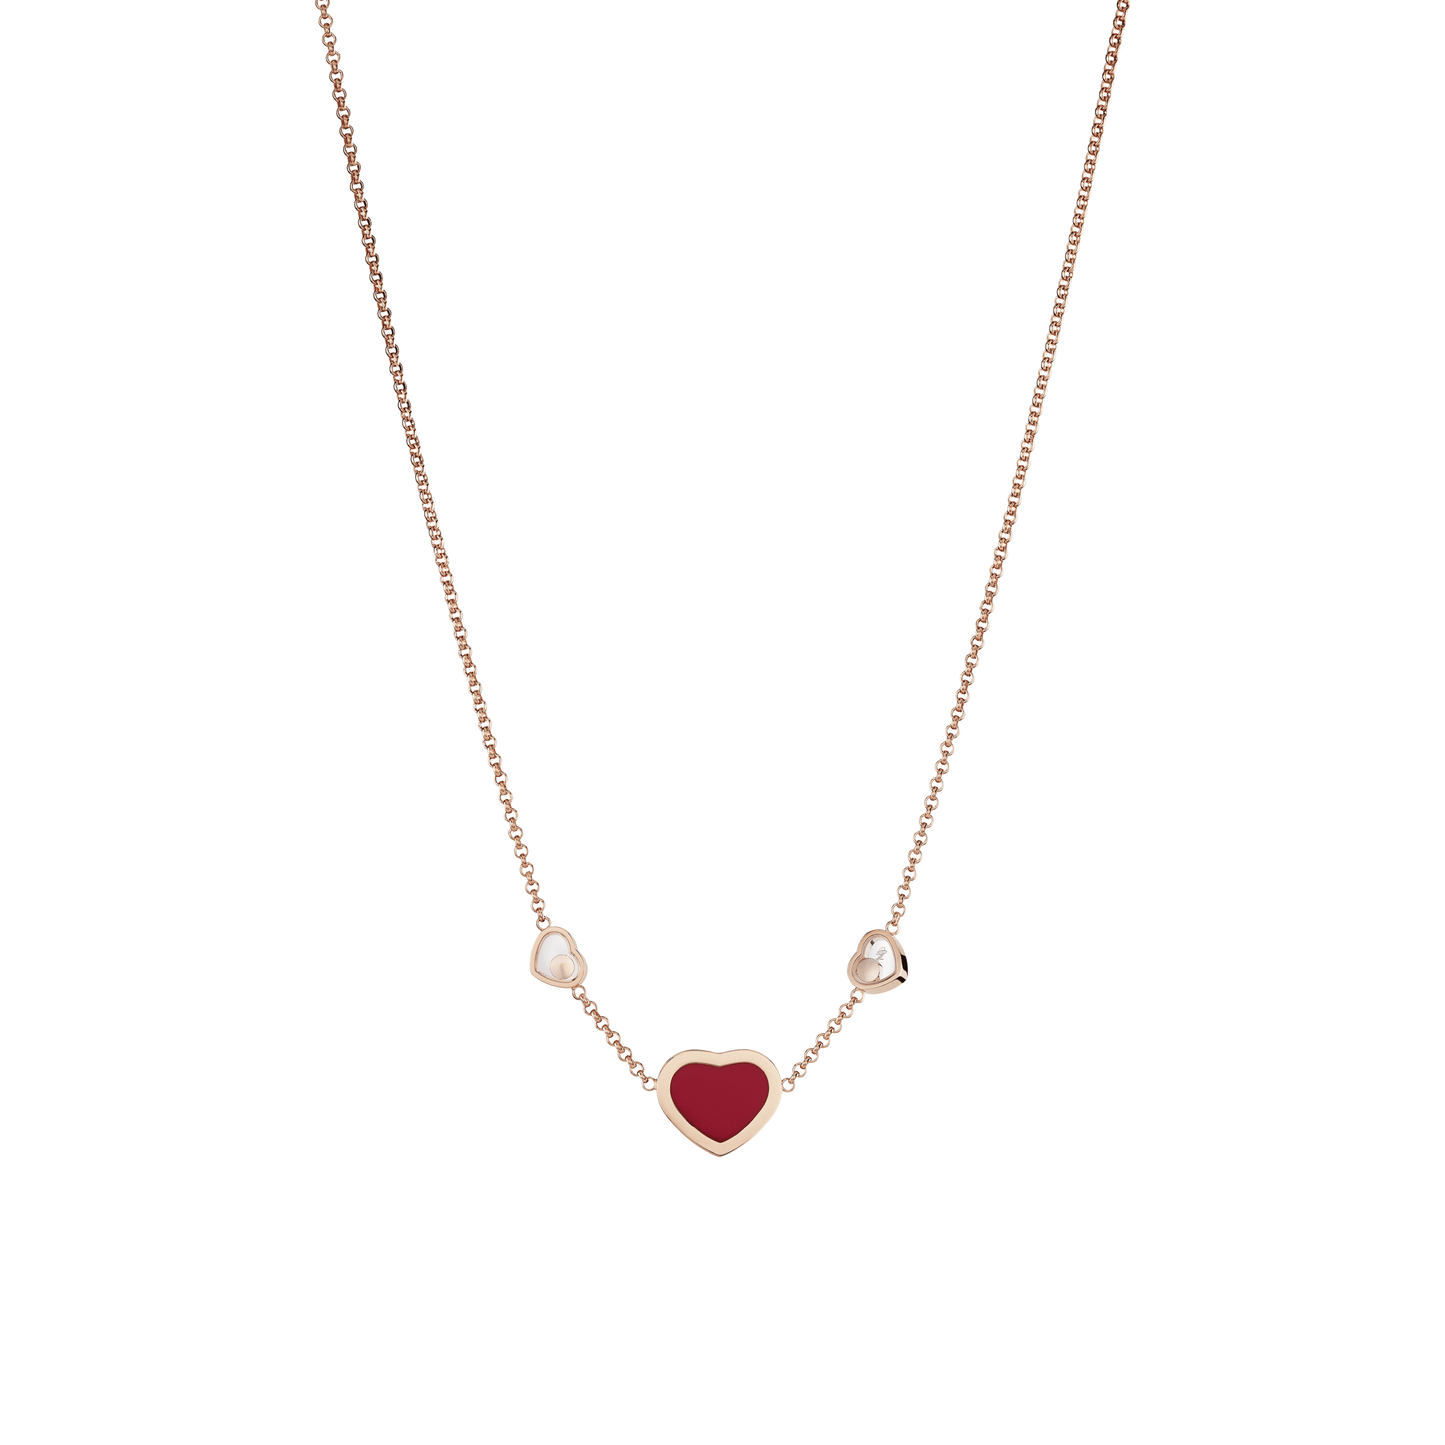 HAPPY HEARTS NECKLACE, ETHICAL ROSE GOLD, DIAMONDS, RED STONE 81A082-5801